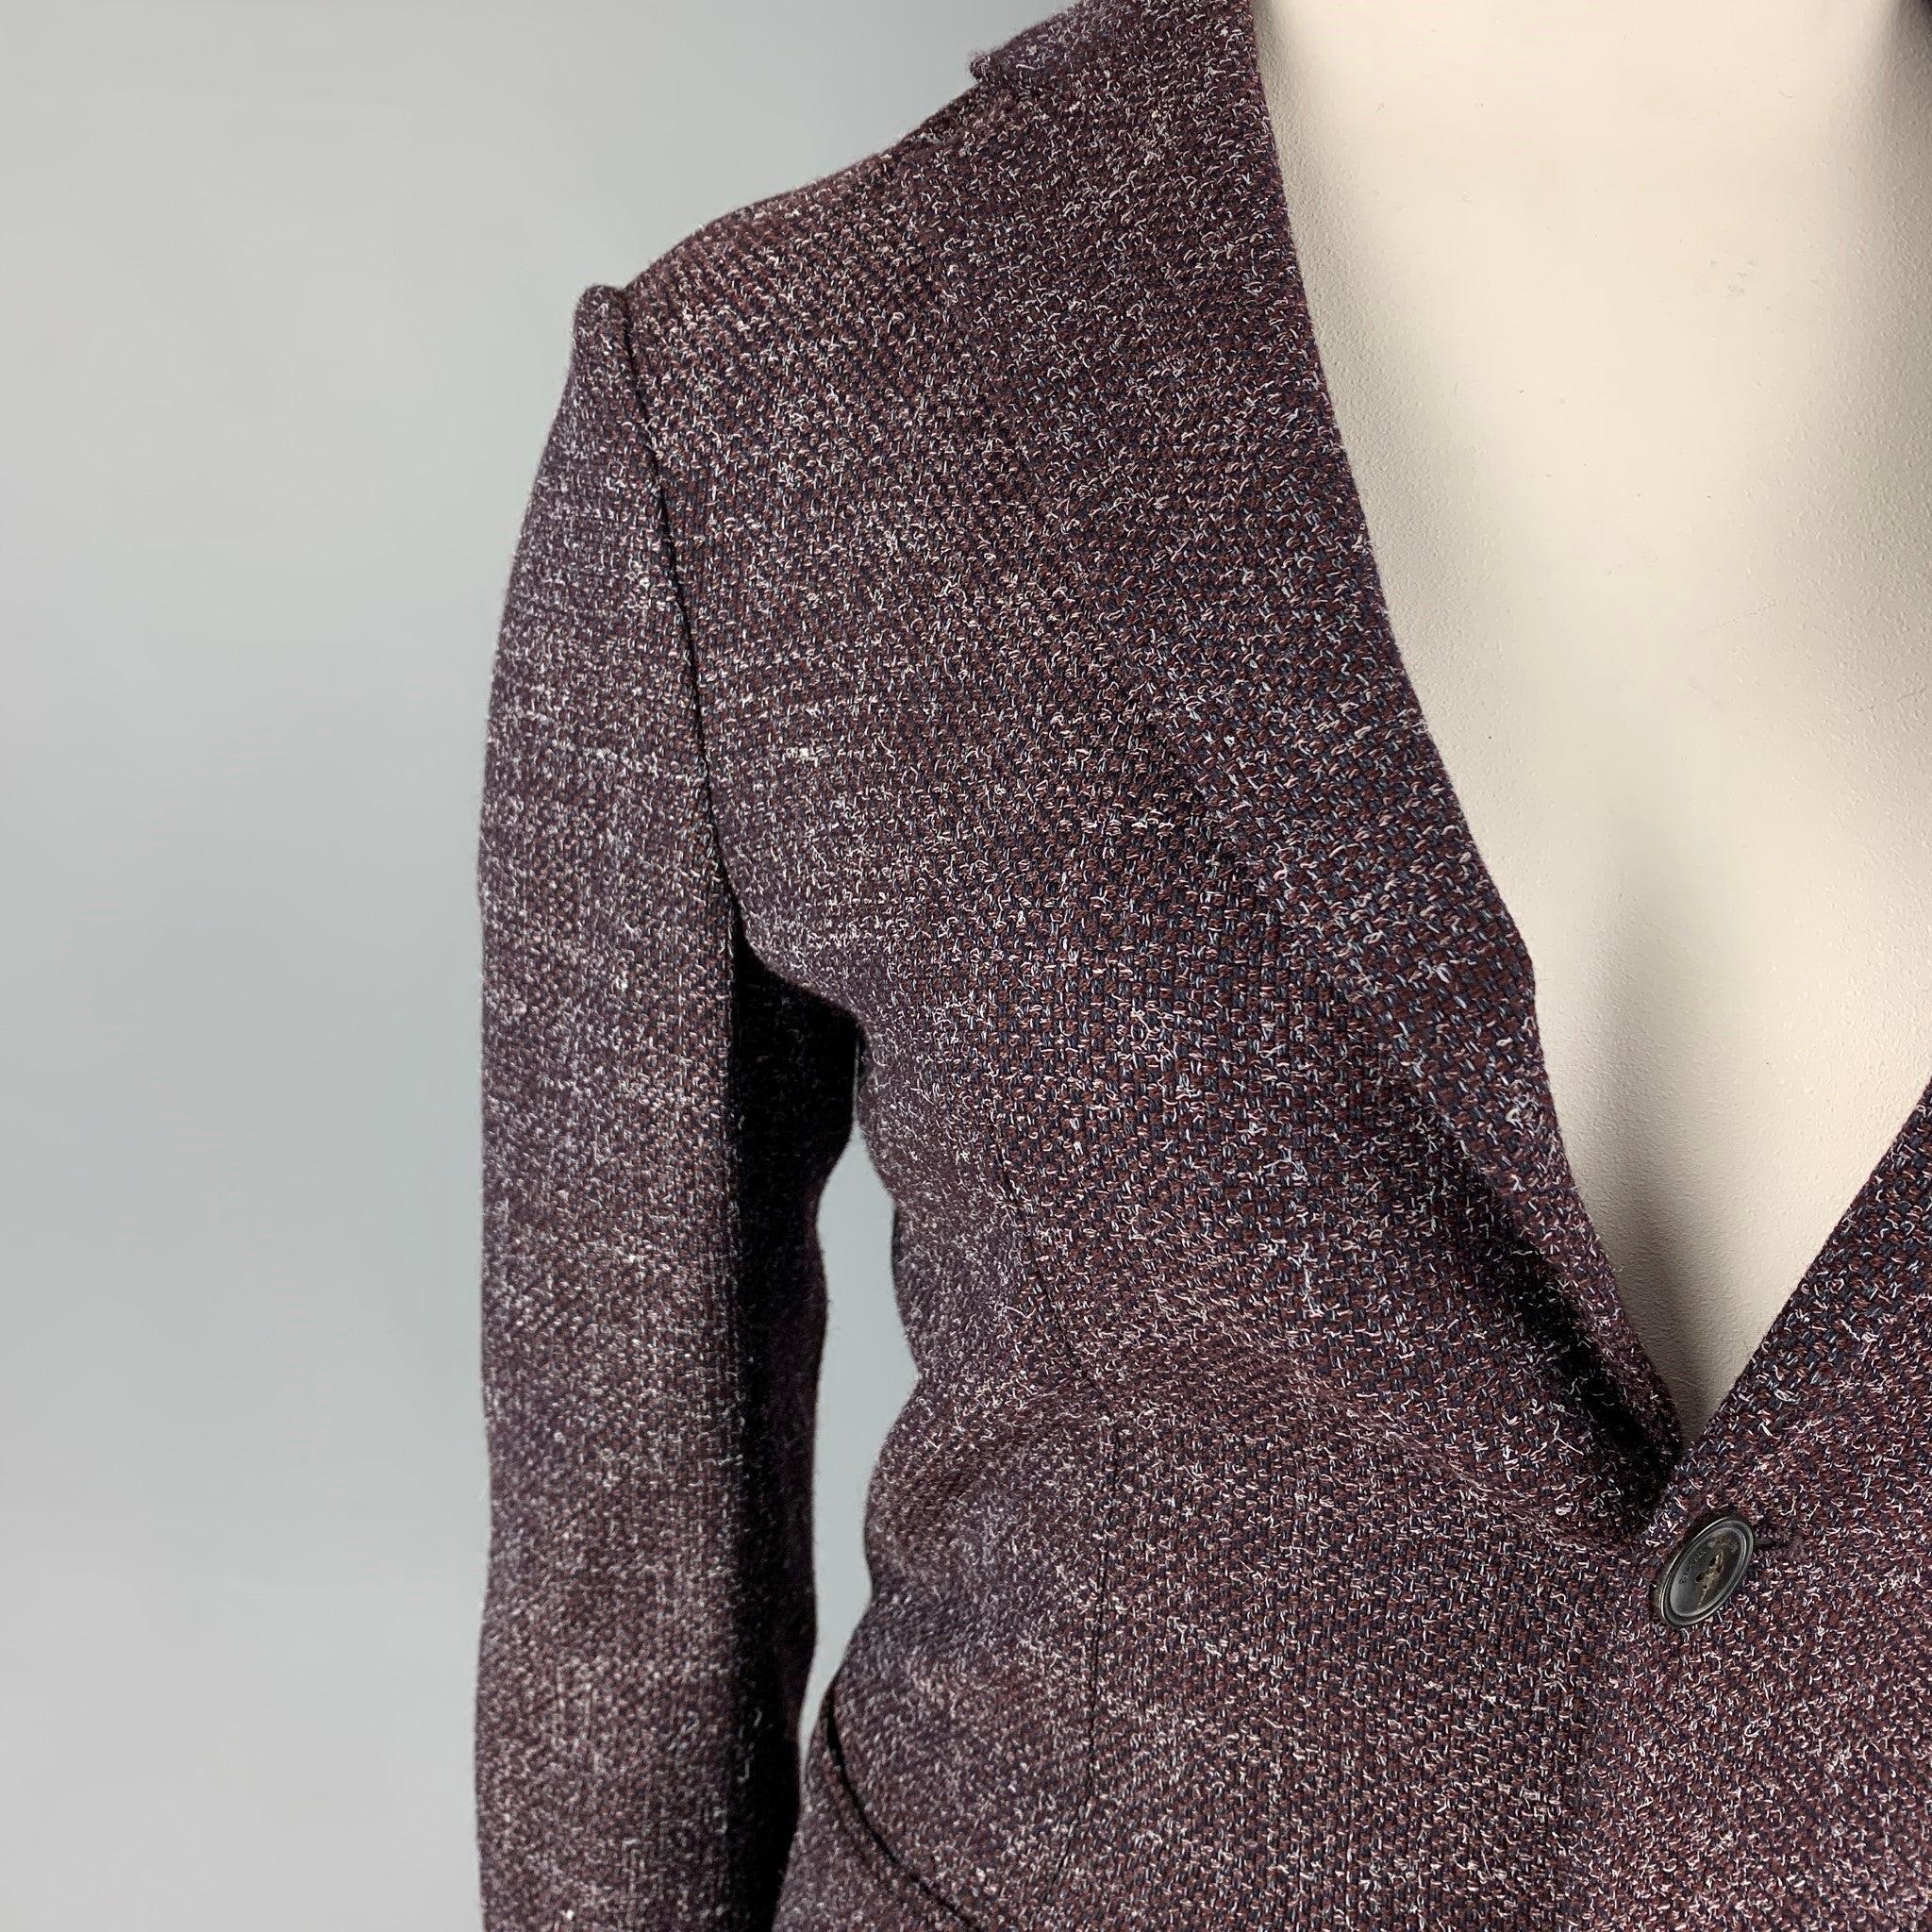 EMPORIO ARMANI blazer comes in a purple & grey heather material featuring a notch lapel, slit pockets, double back vent, and a double button closure.
Very Good
Pre-Owned Condition.
Fabric tag removed.  

Marked:   Size tag removed 

Measurements: 
